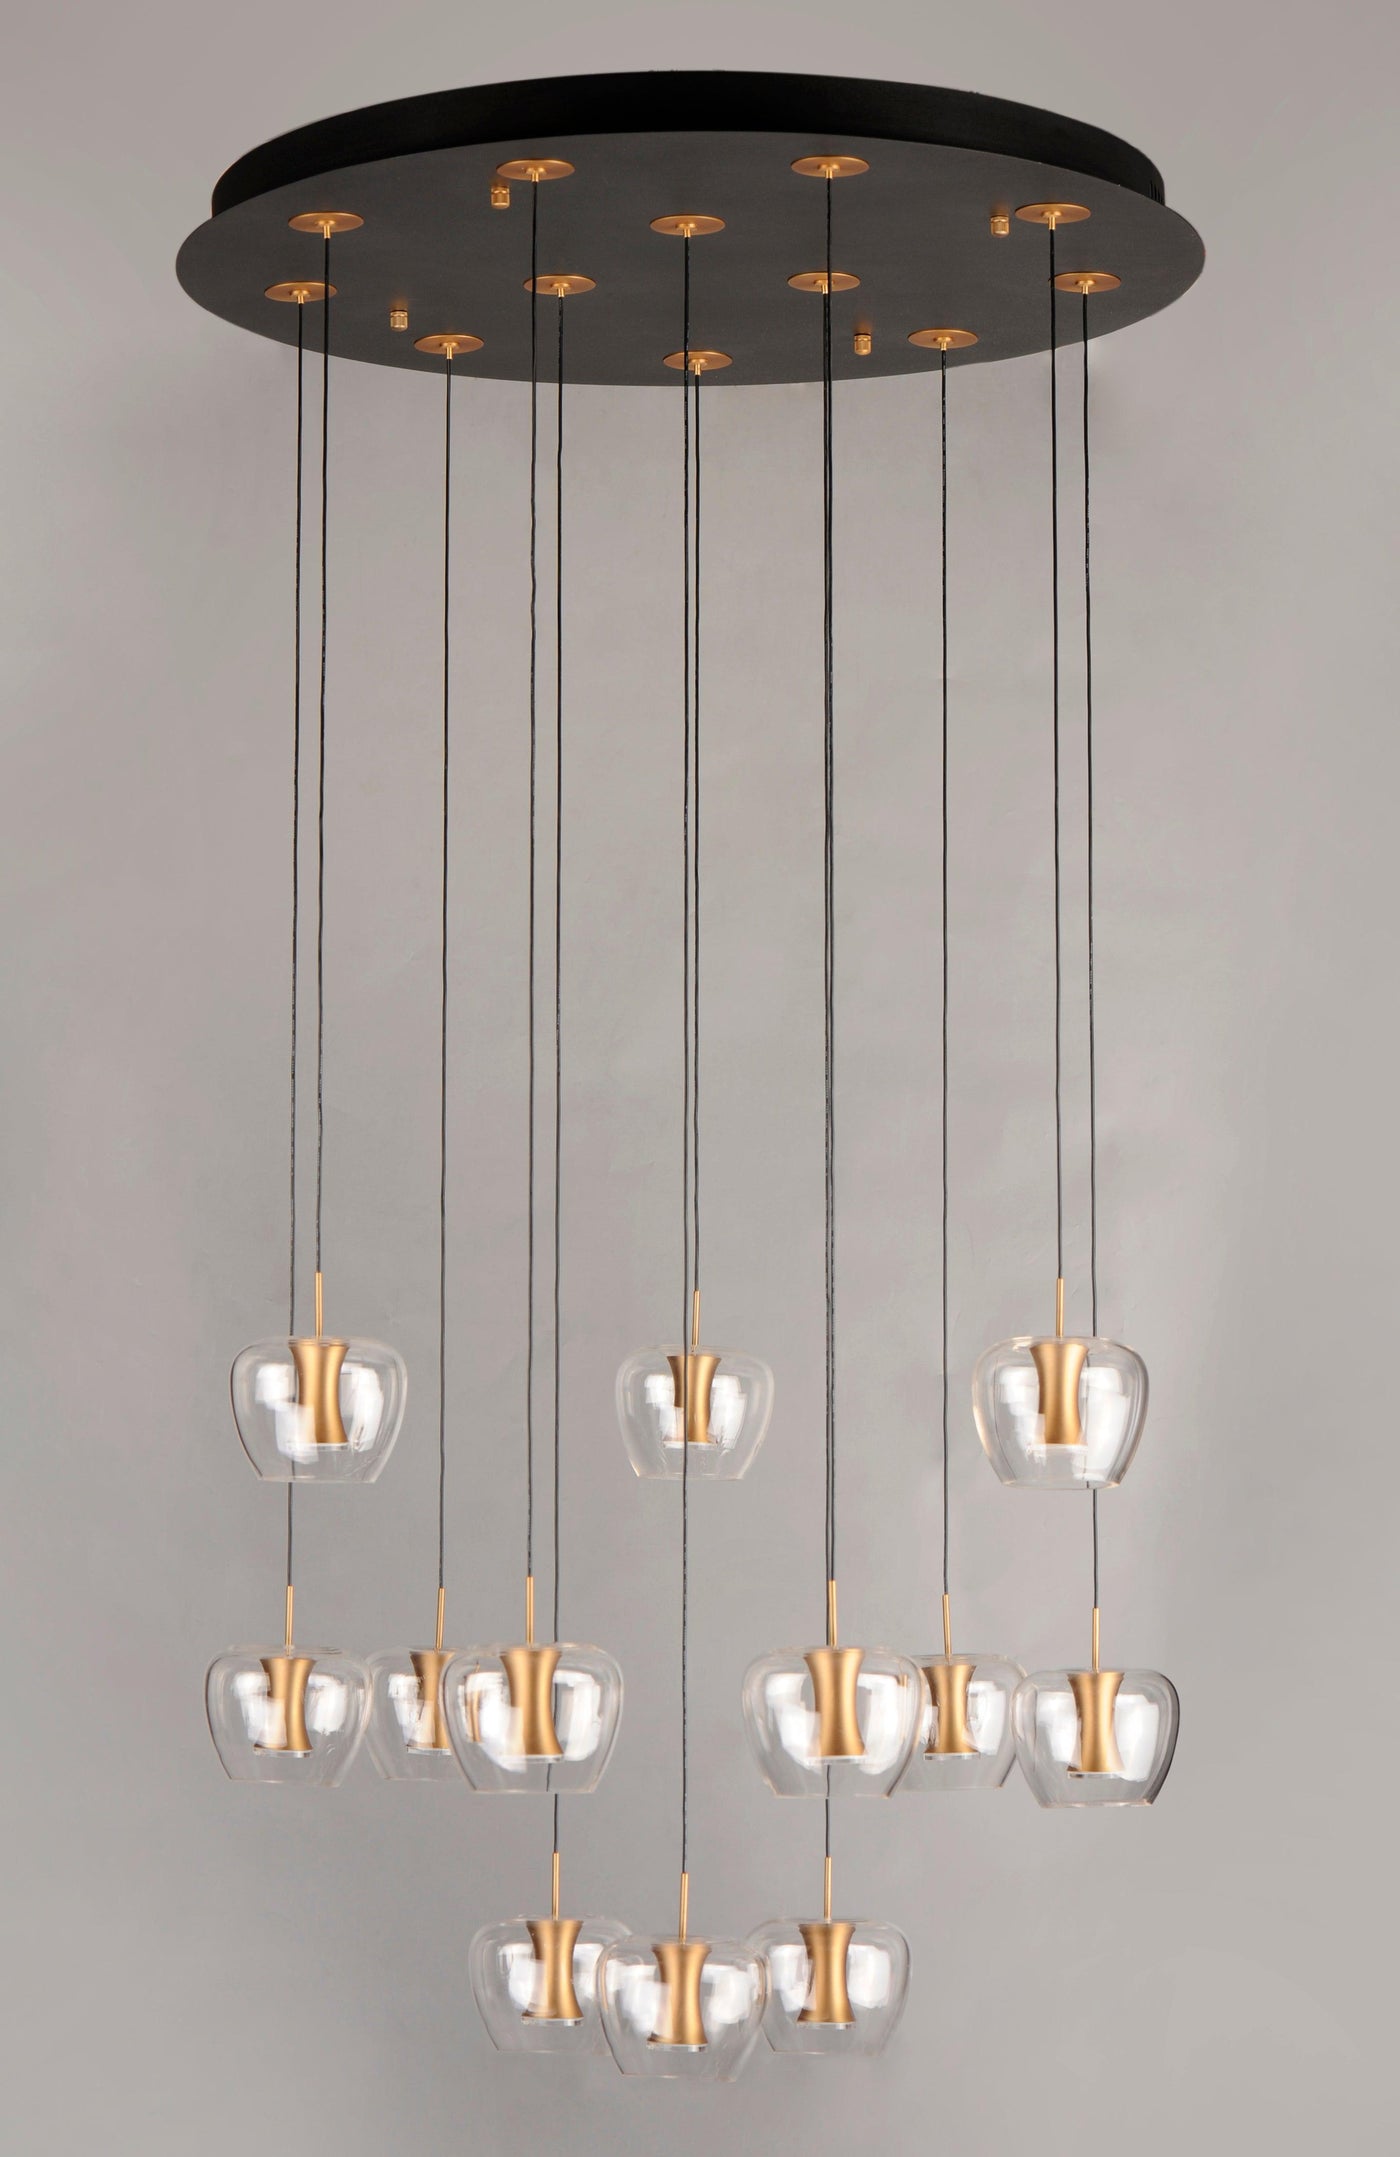 LED Black and Gold with Clear Apple Shaped Glass 12 Light Pendant - LV LIGHTING